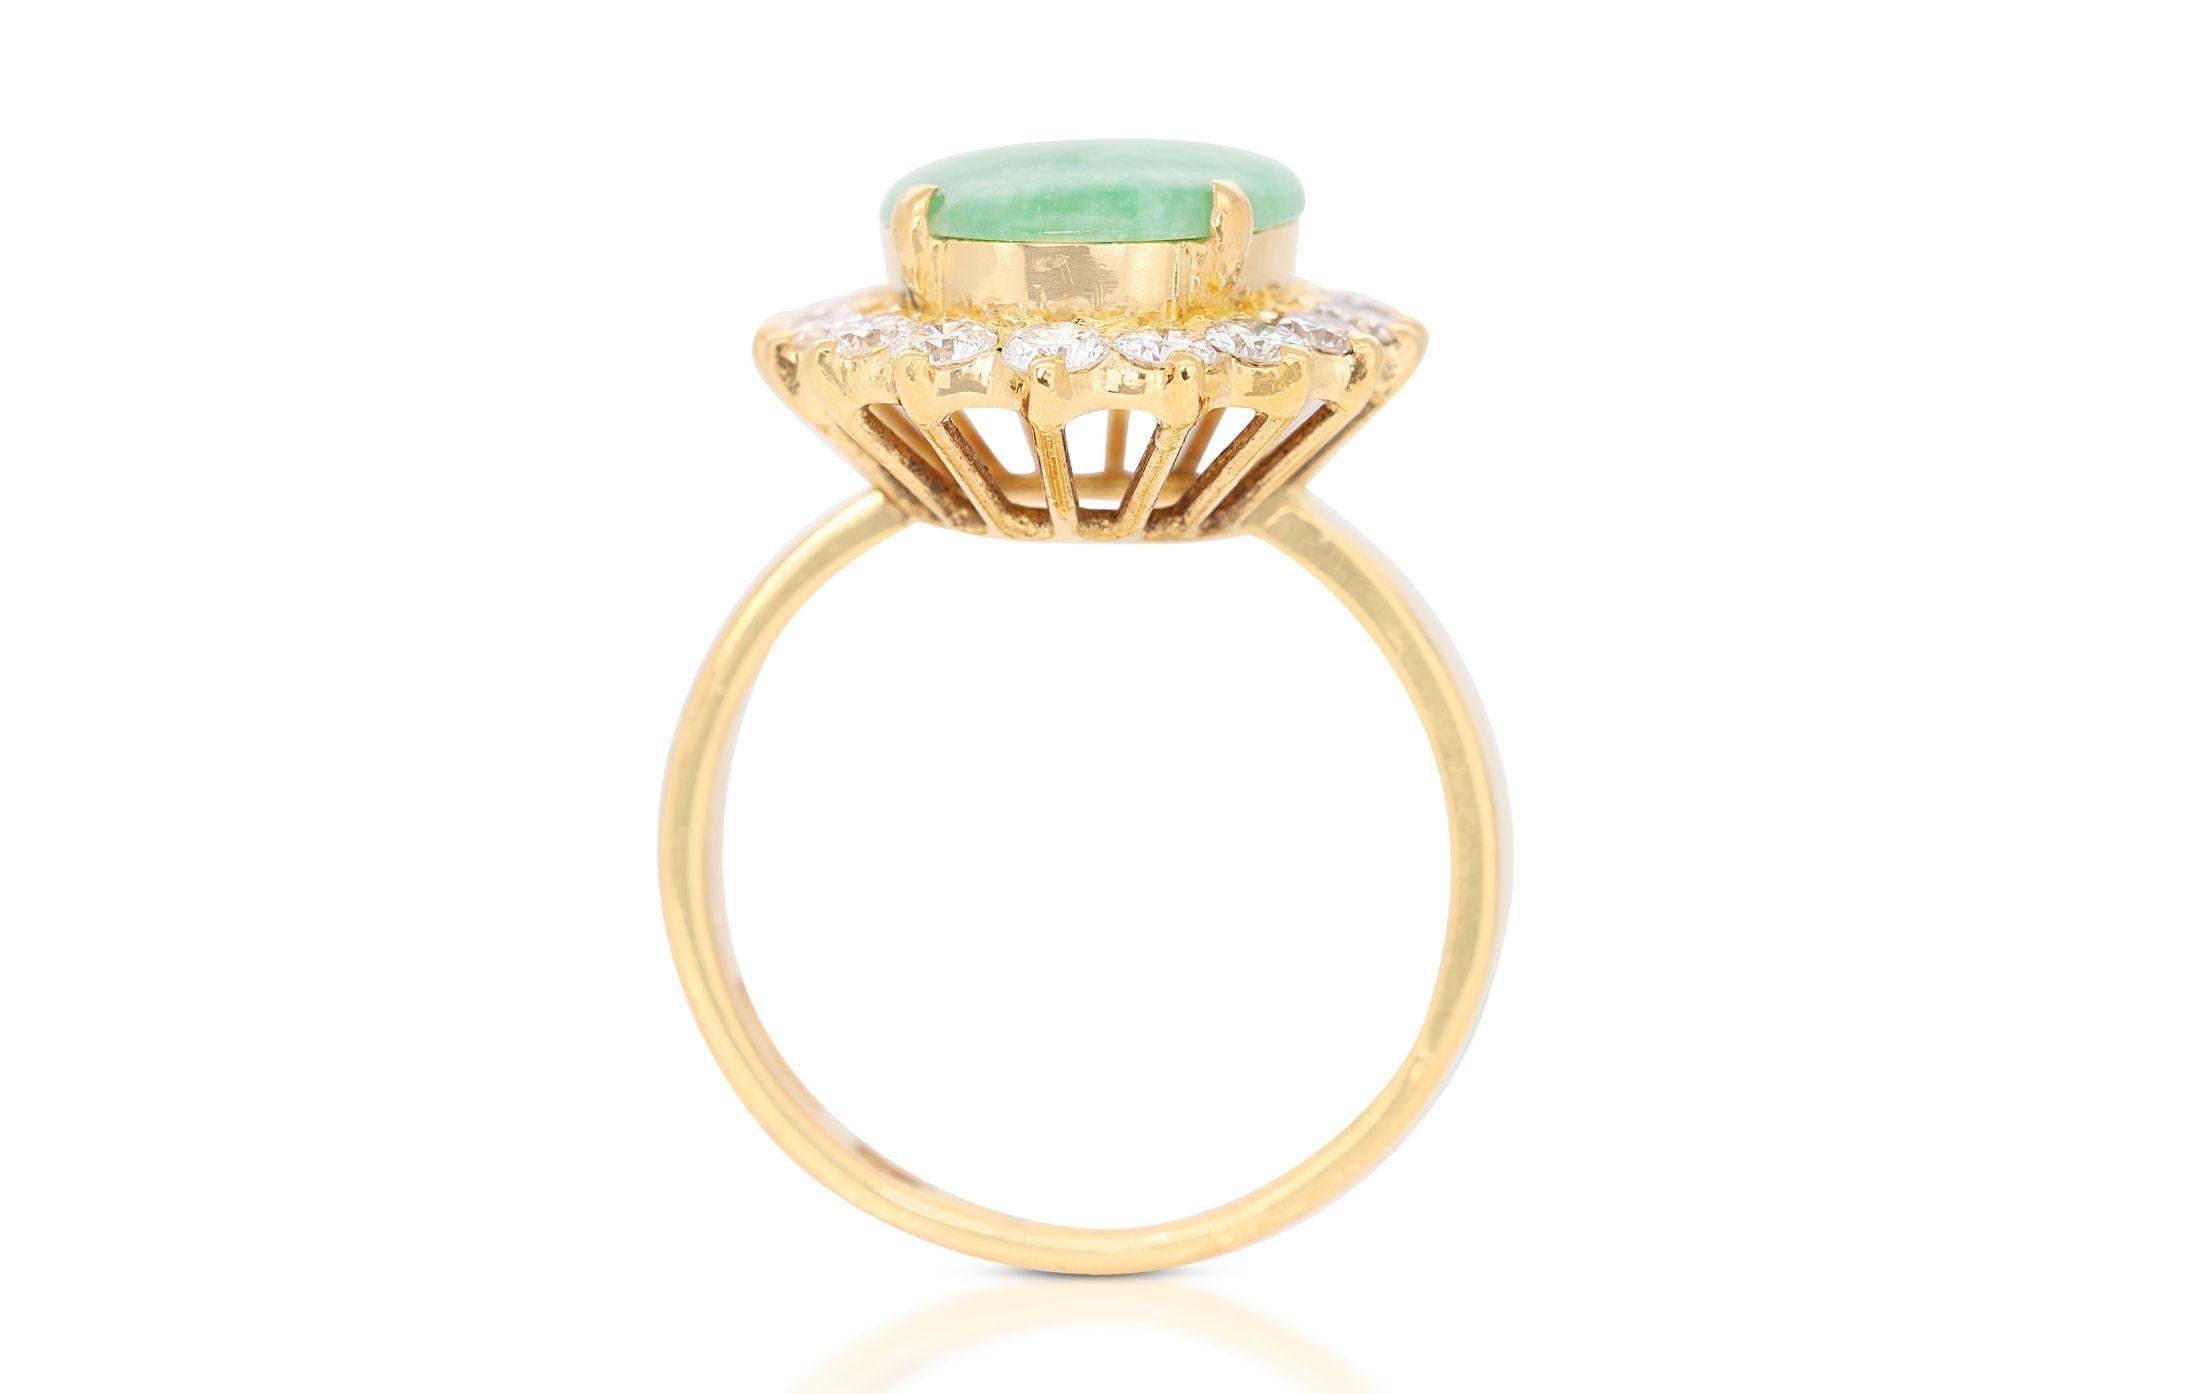 18K Yellow Gold Ring Featuring a 2.70ct Translucent Green Jade For Sale 1